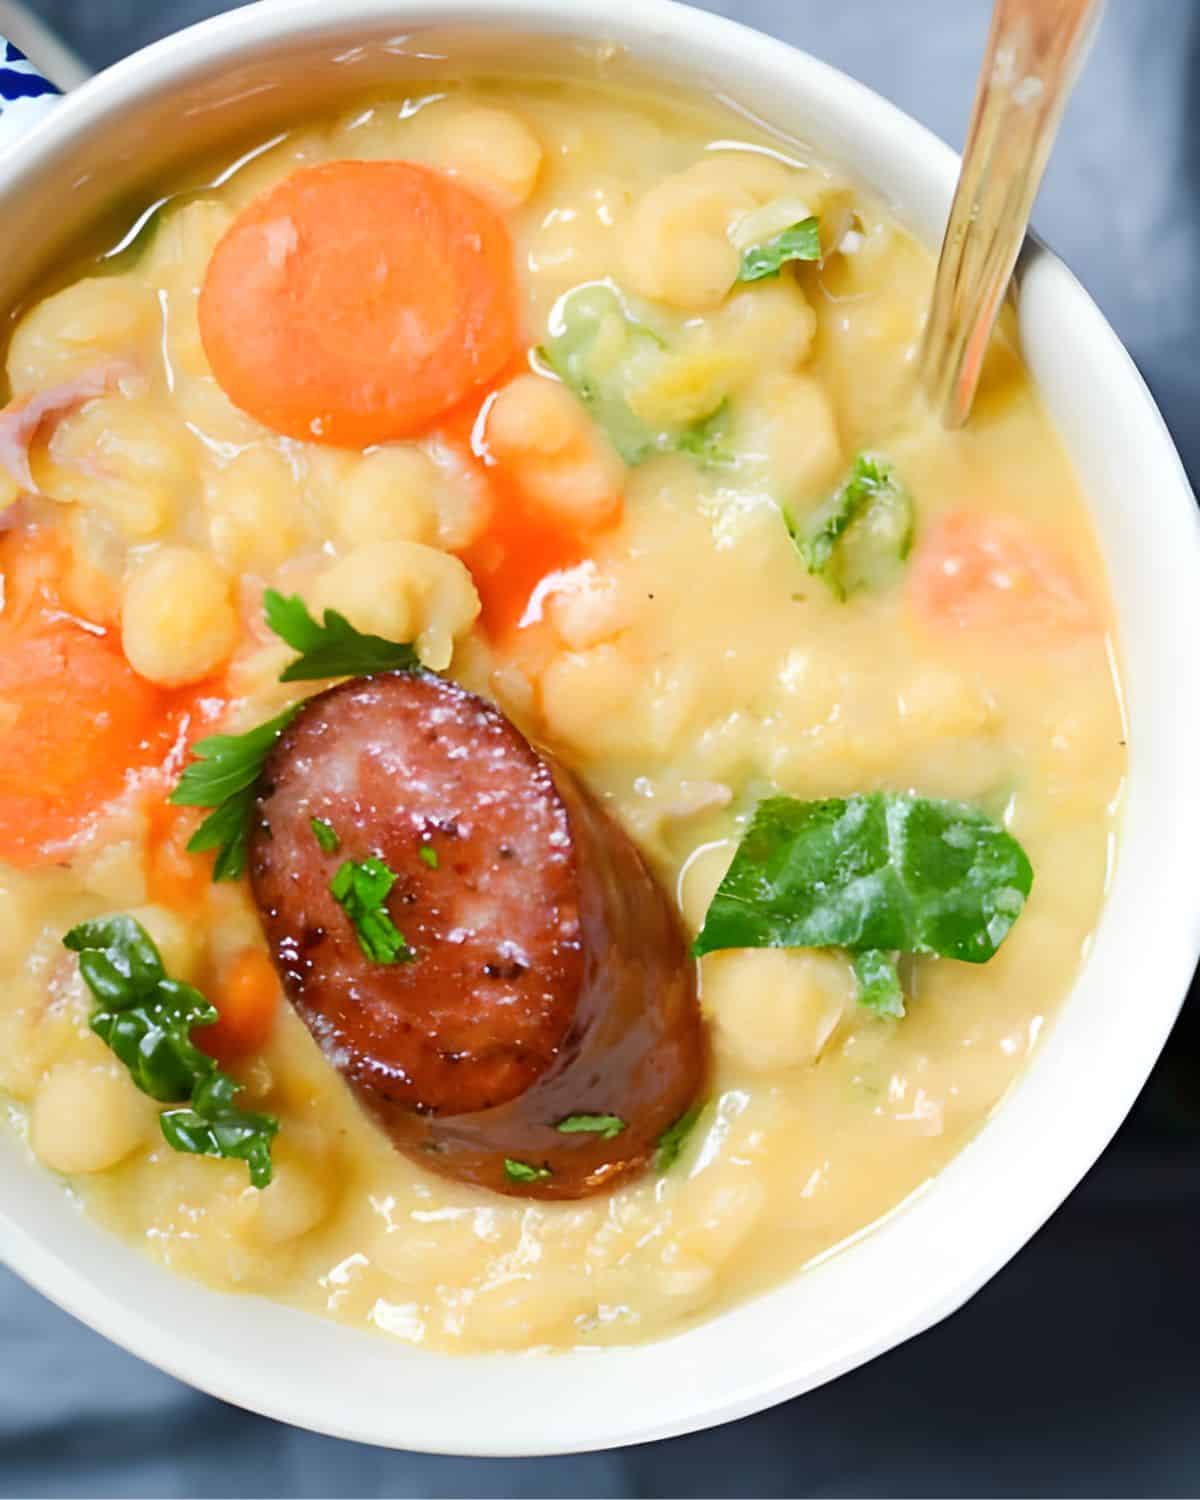 Serving yellow pea soup with smoked sausage and hot sauce.